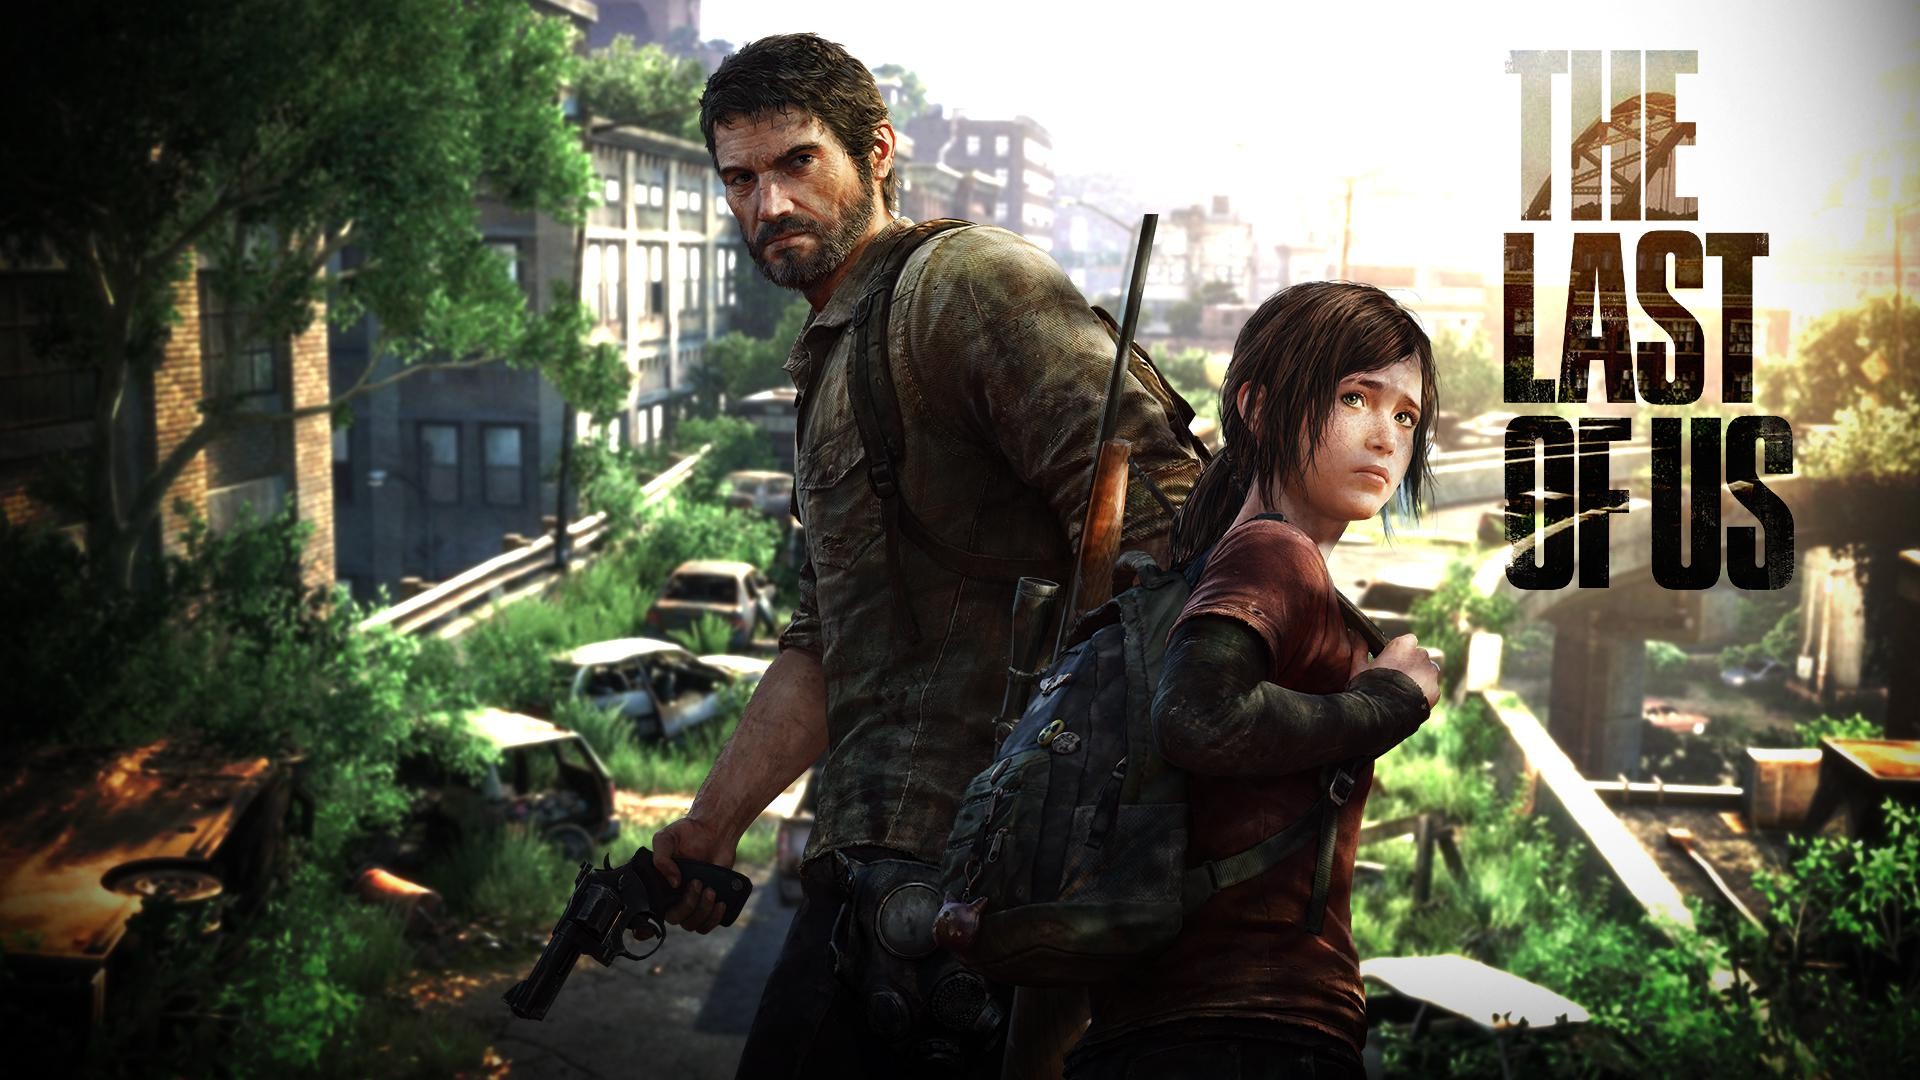 Let’s Play The Last of Us (Grounded Difficulty)